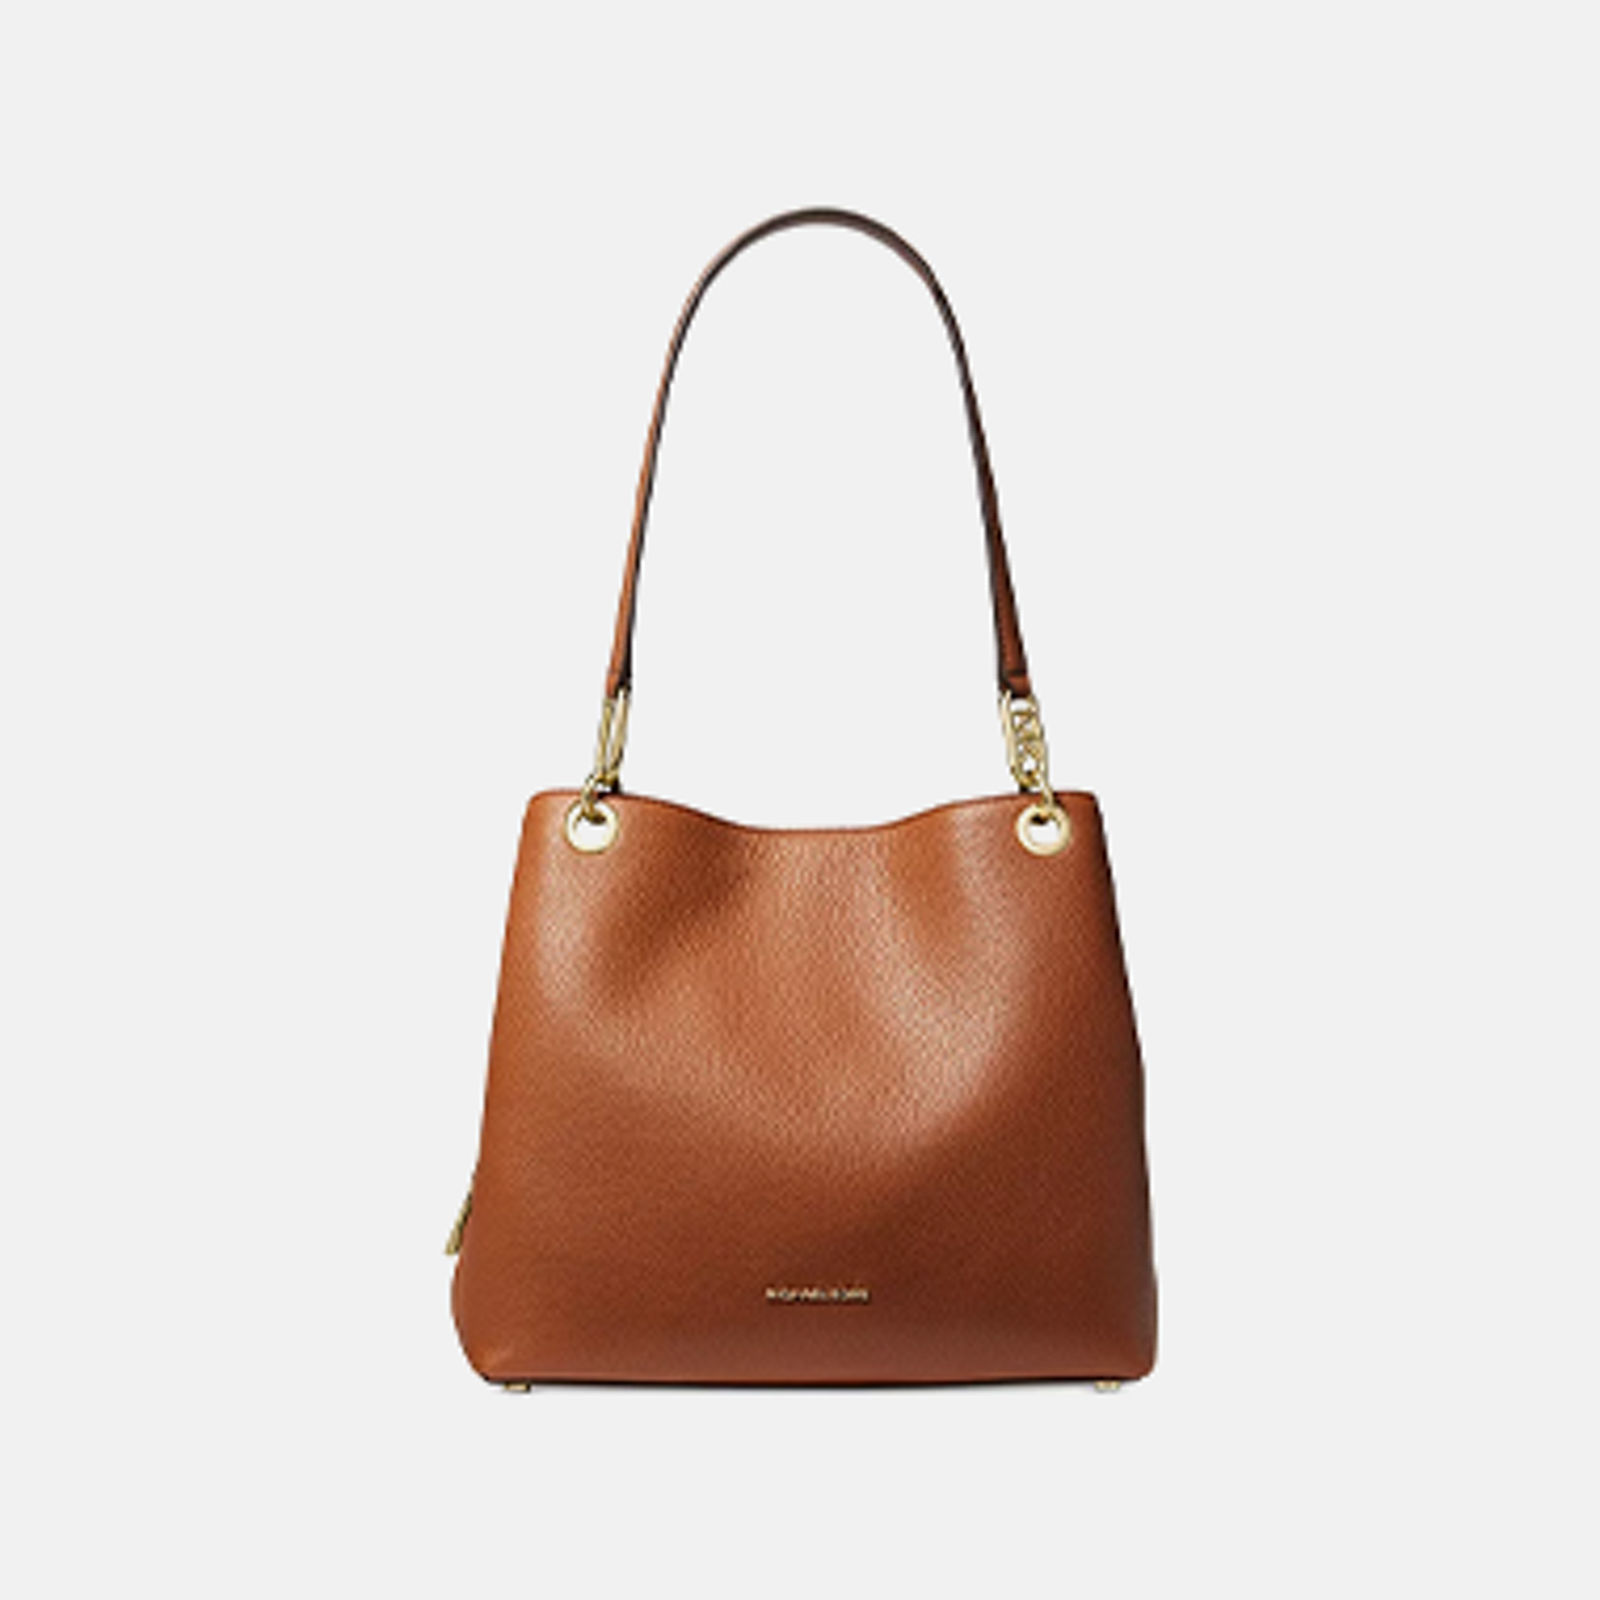 Michael Kors pocketbooks - clothing & accessories - by owner